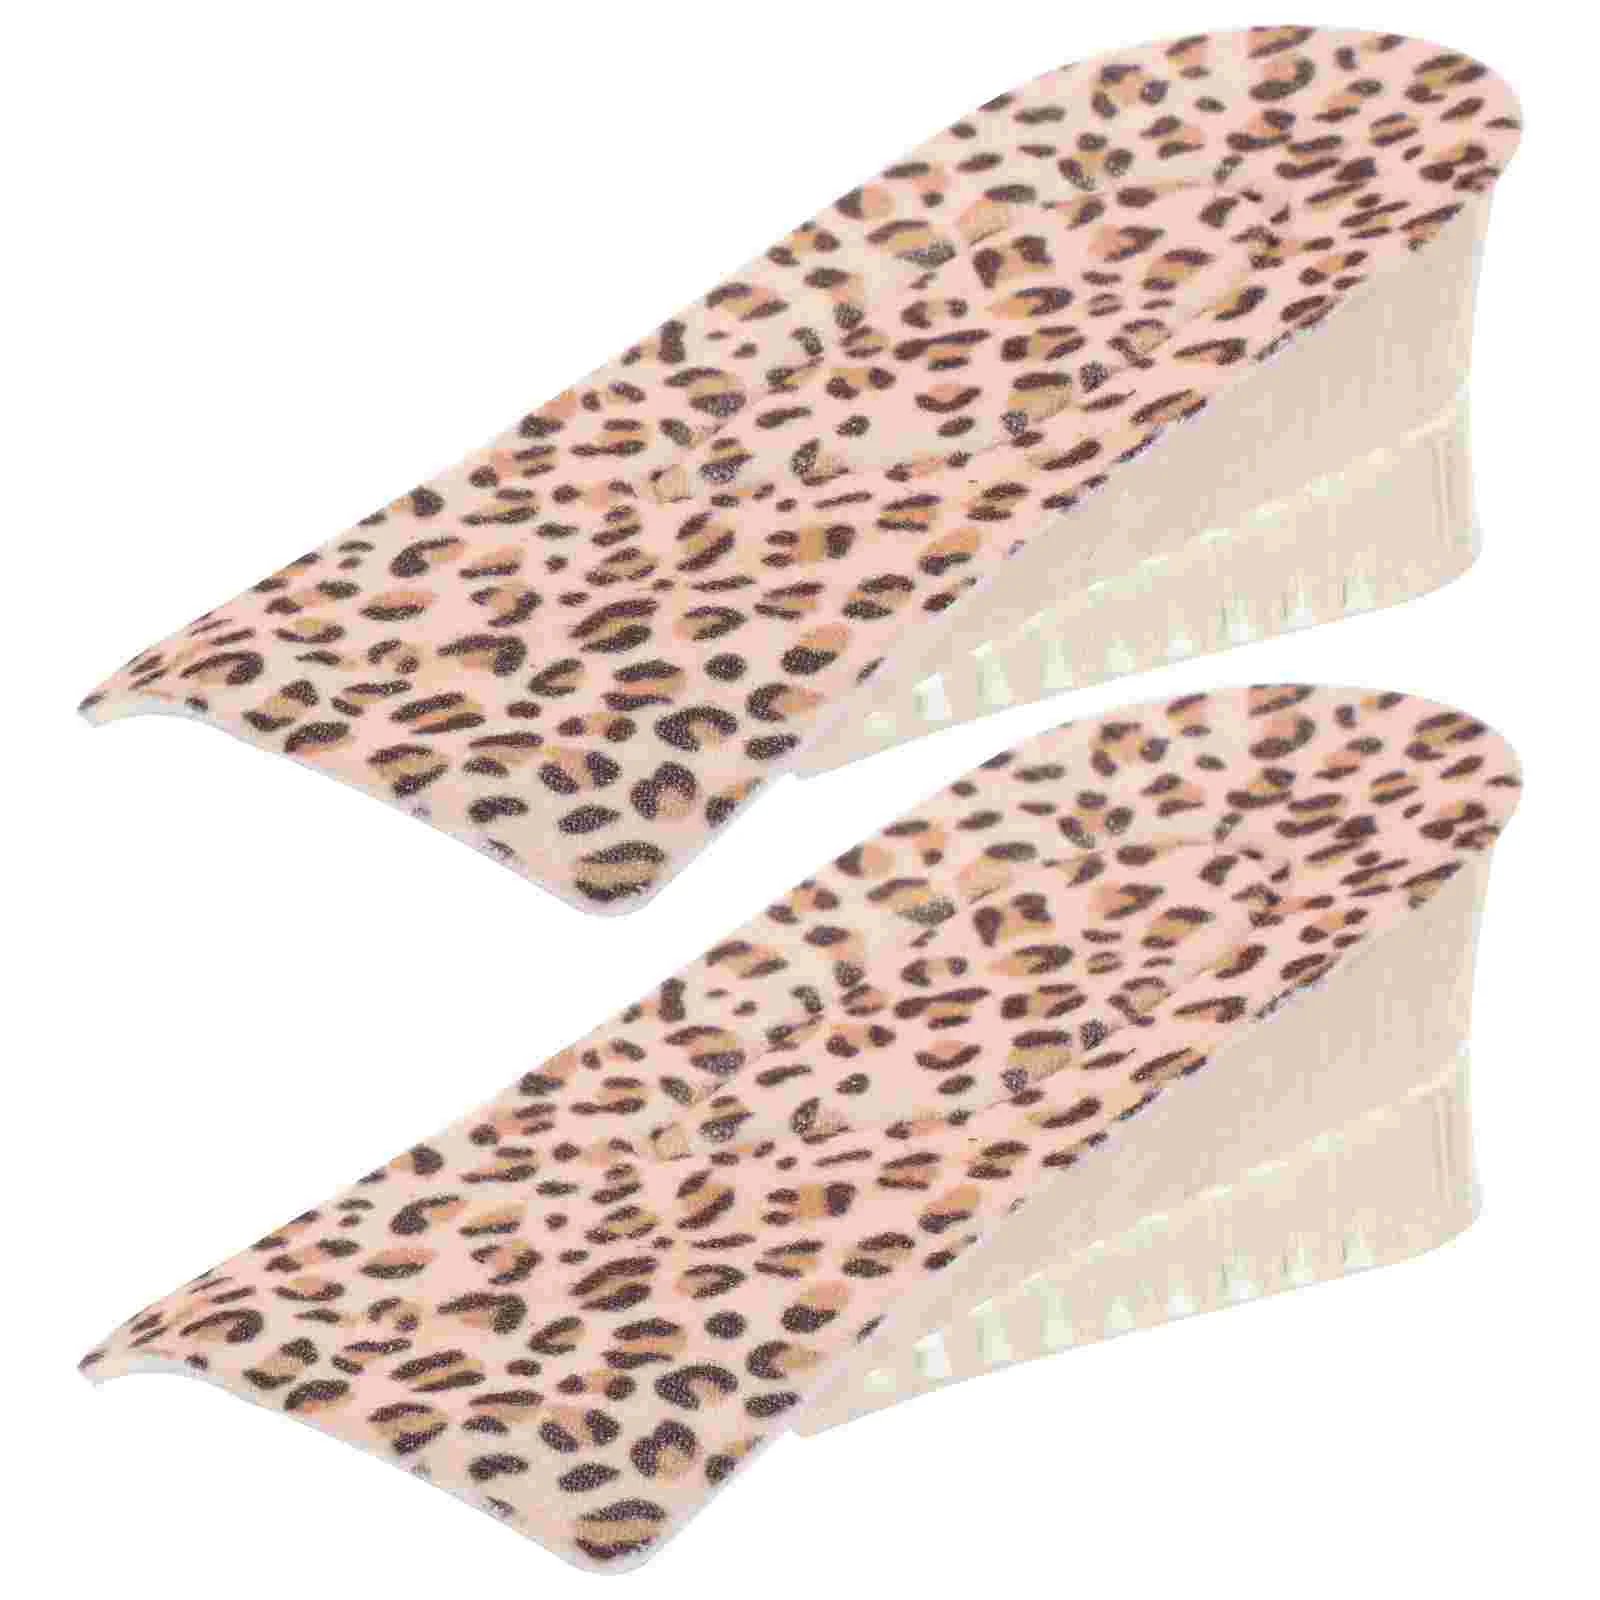 Heightening Insoles Invisible Increase Shoe Cushion Internal Even up Leveler Women Insert